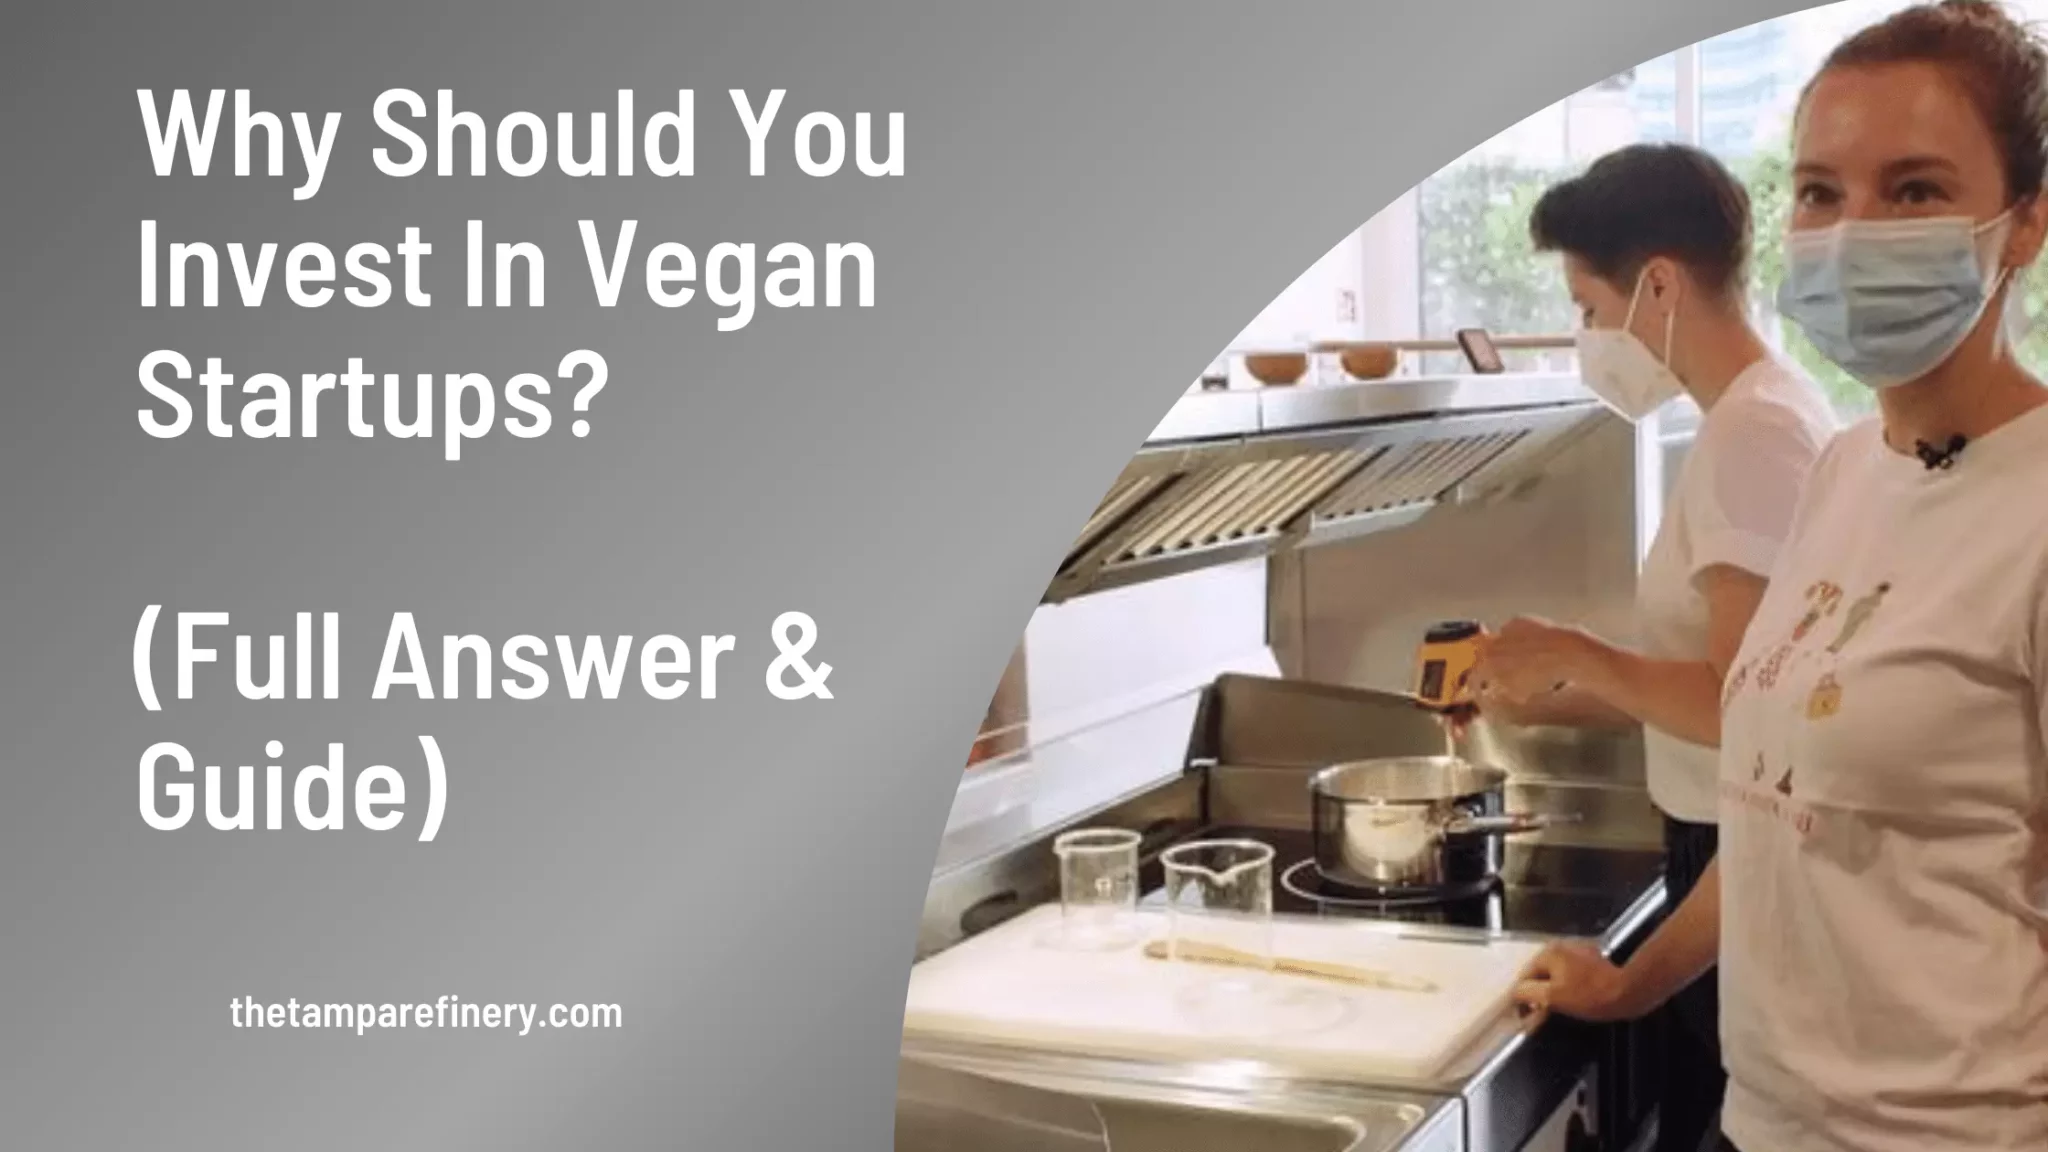 Why Should You Invest In Vegan Startups